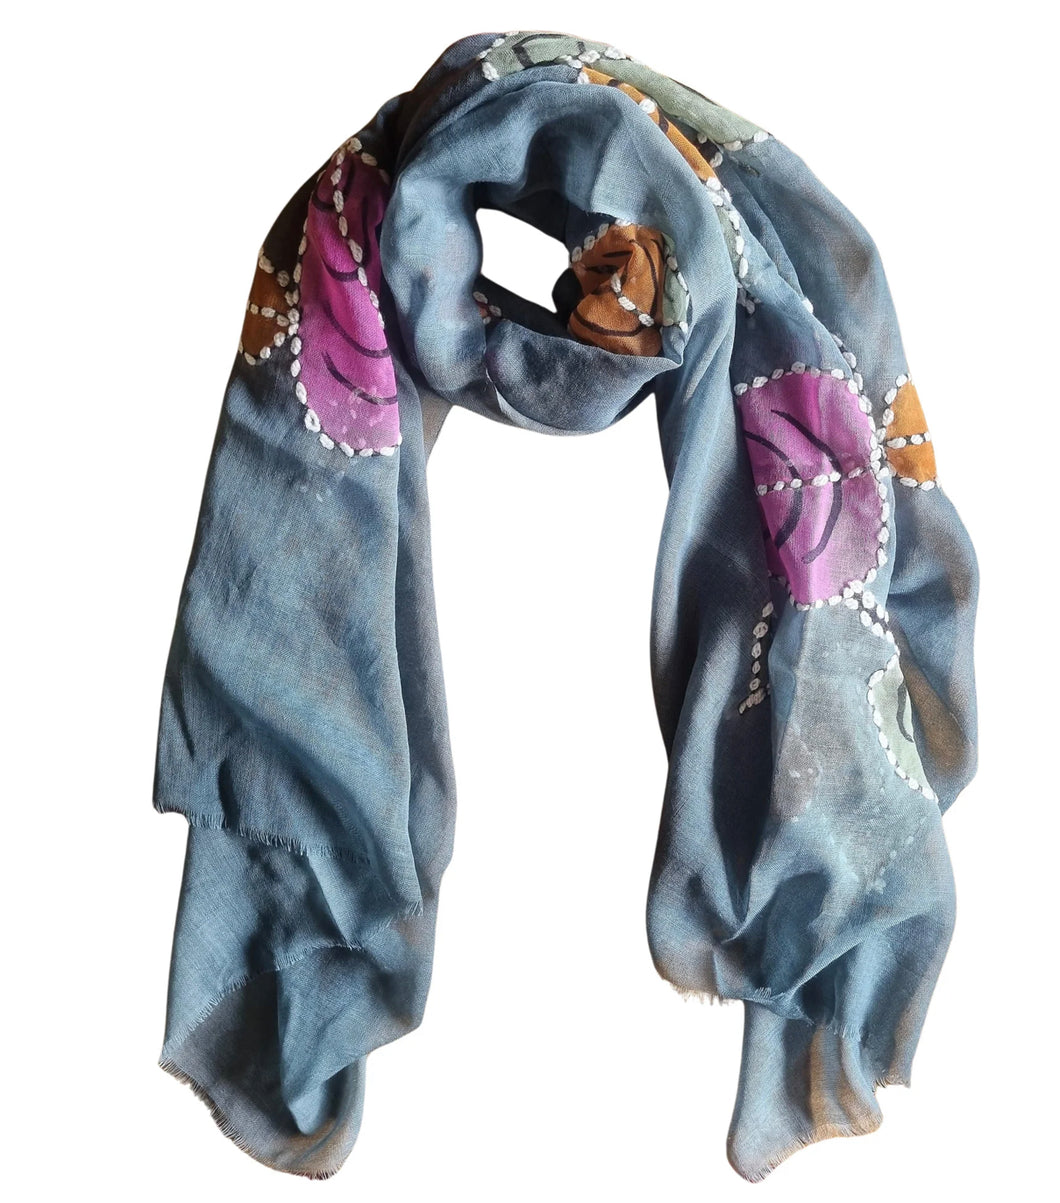 Painted and embroidered scarf grey blue tones